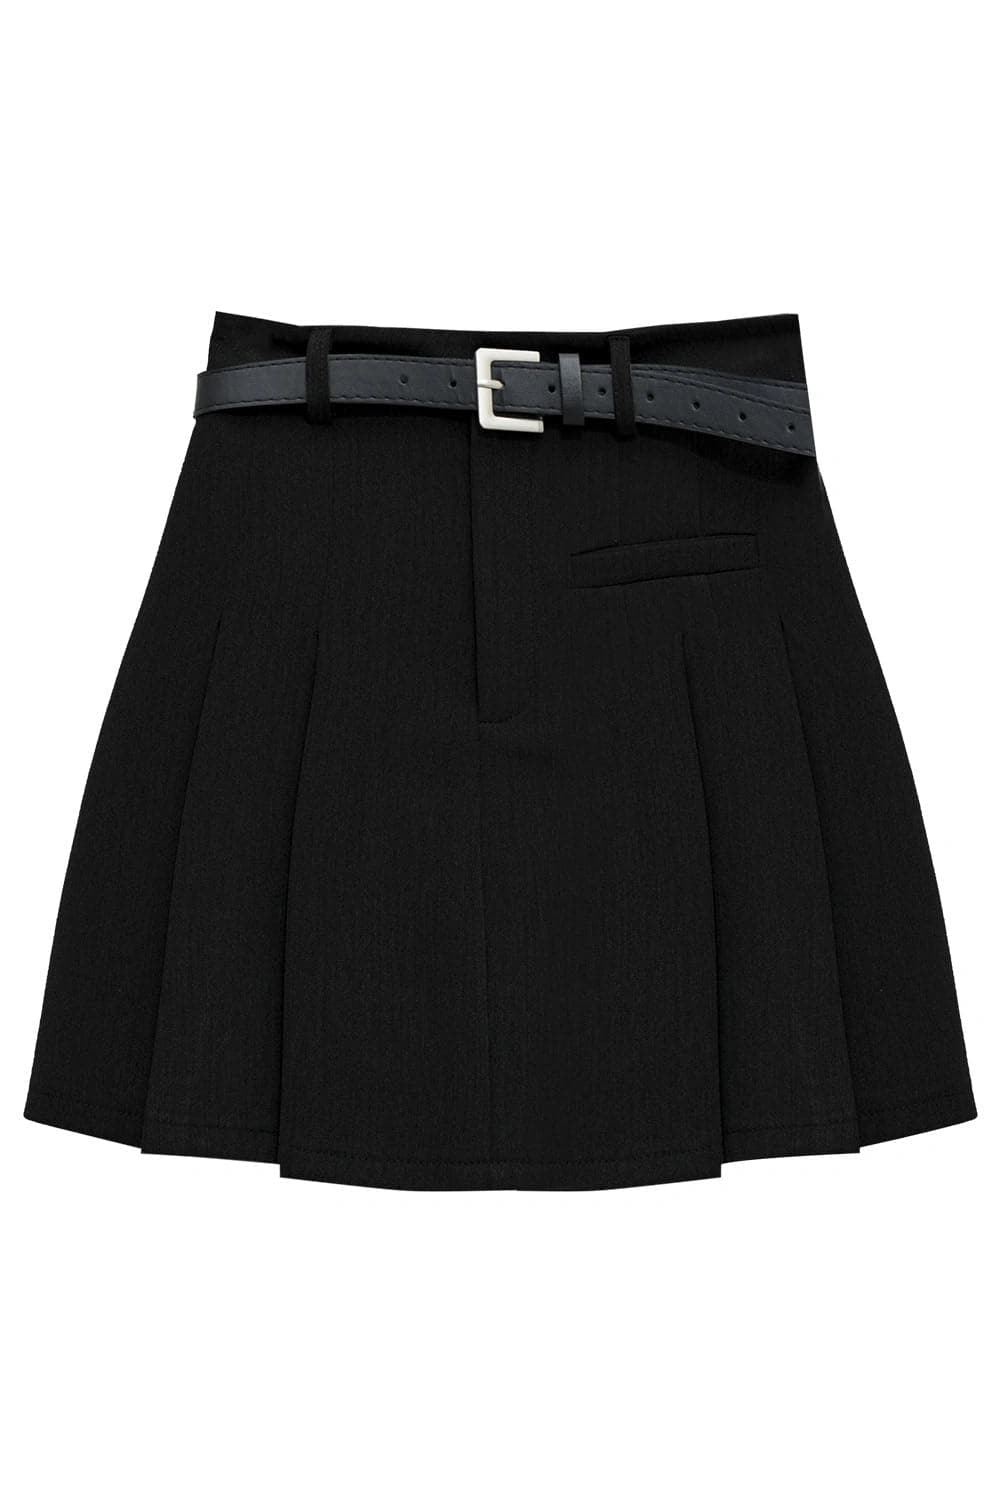 Belted A-Line Mini Skirt with Pleated Detail